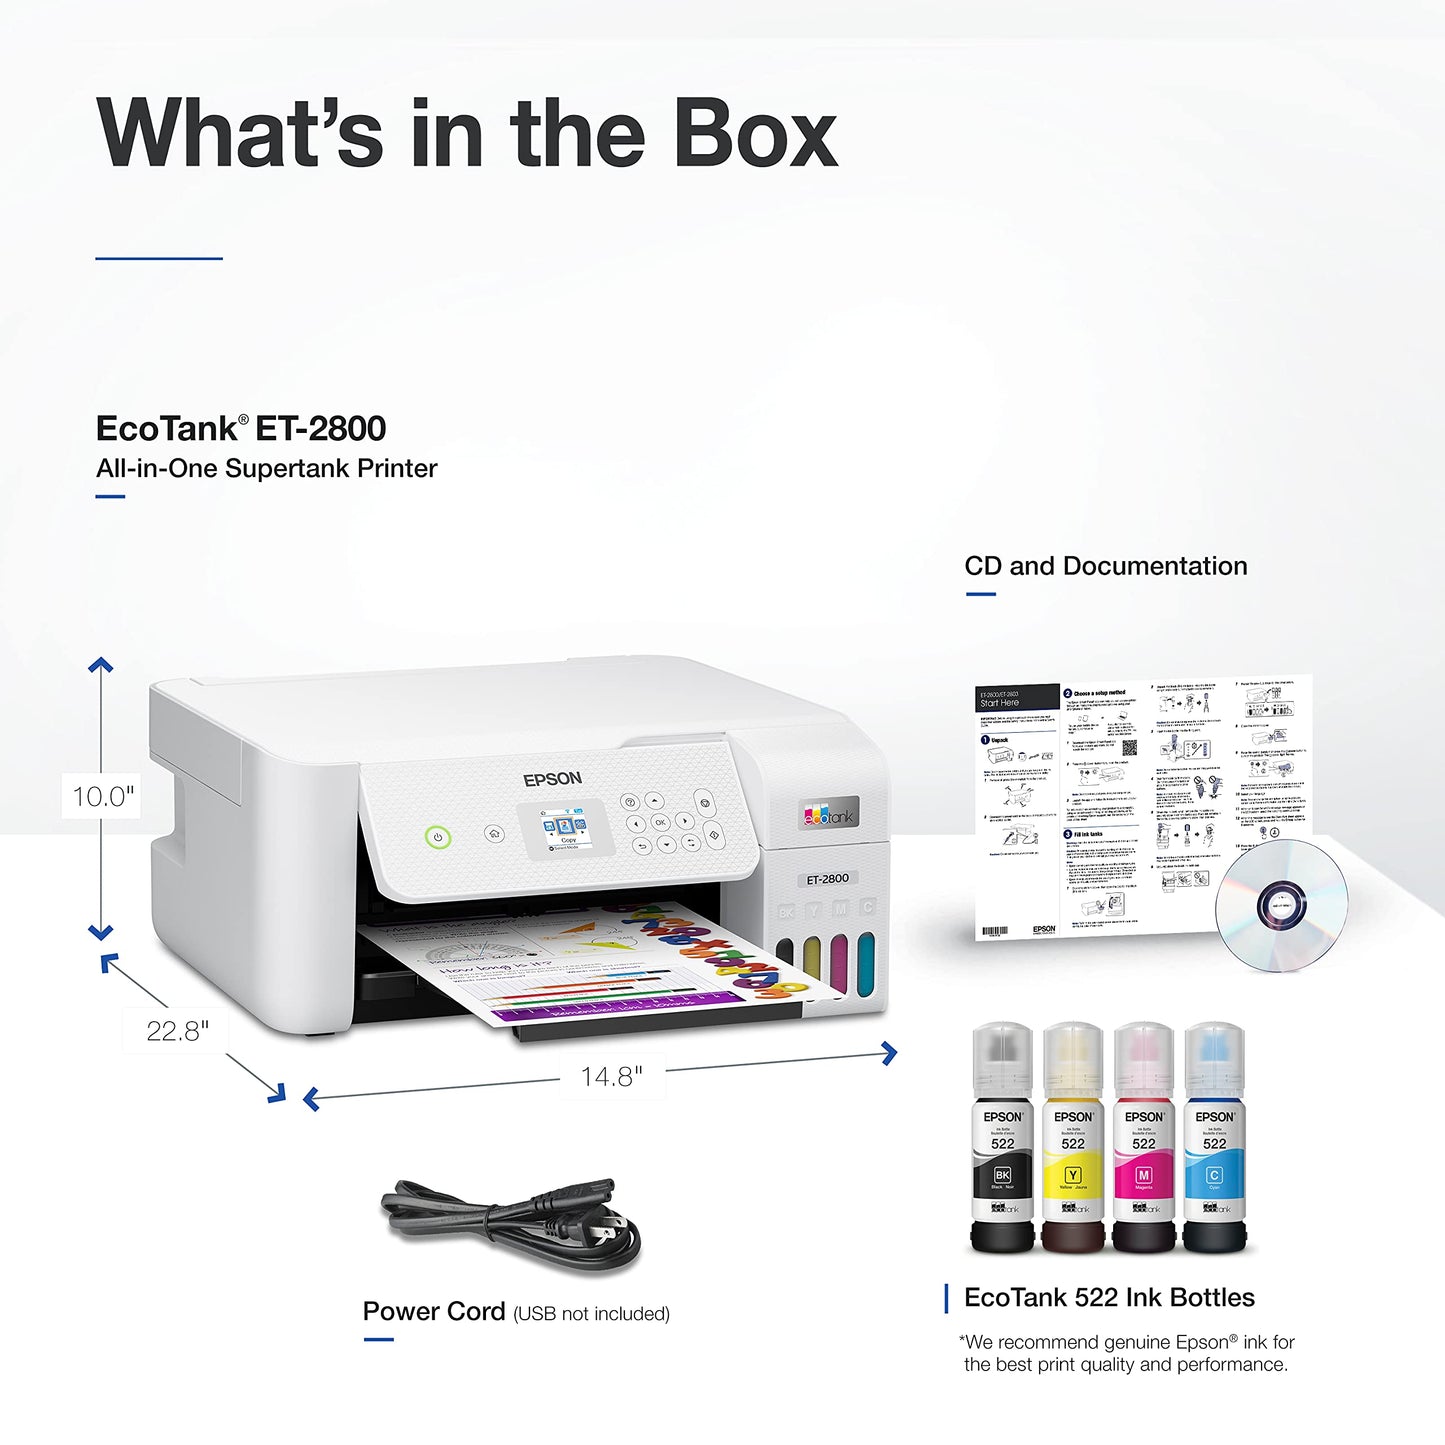 Epson EcoTank ET-2800 Wireless Color All-in-One Cartridge-Free Supertank Printer with Scan and Copy â€“ The Ideal Basic Home Printer - White, Medium